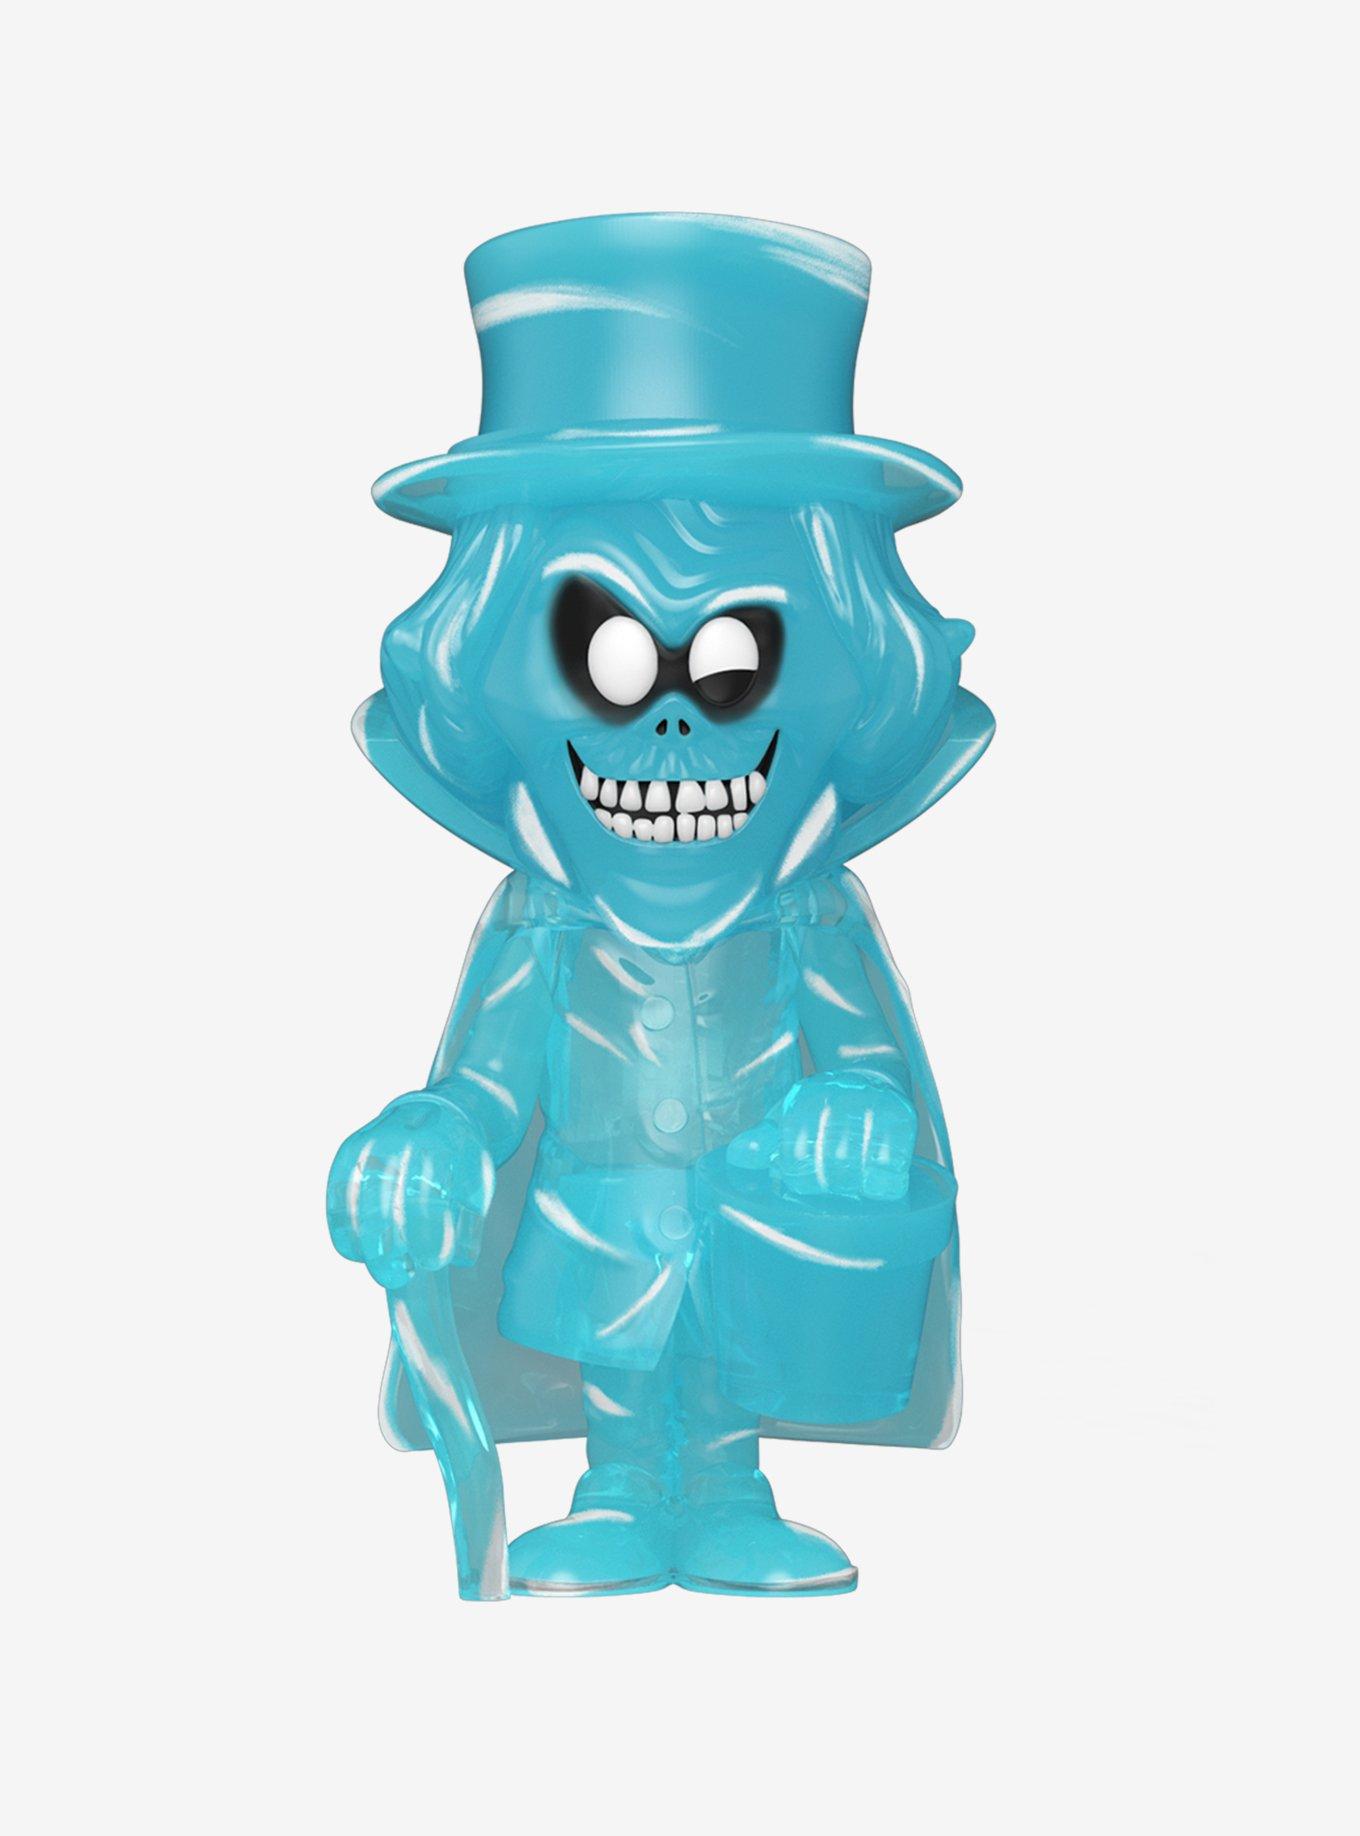 Hatbox Ghost has entered the chat. Haunted Mansion appears in